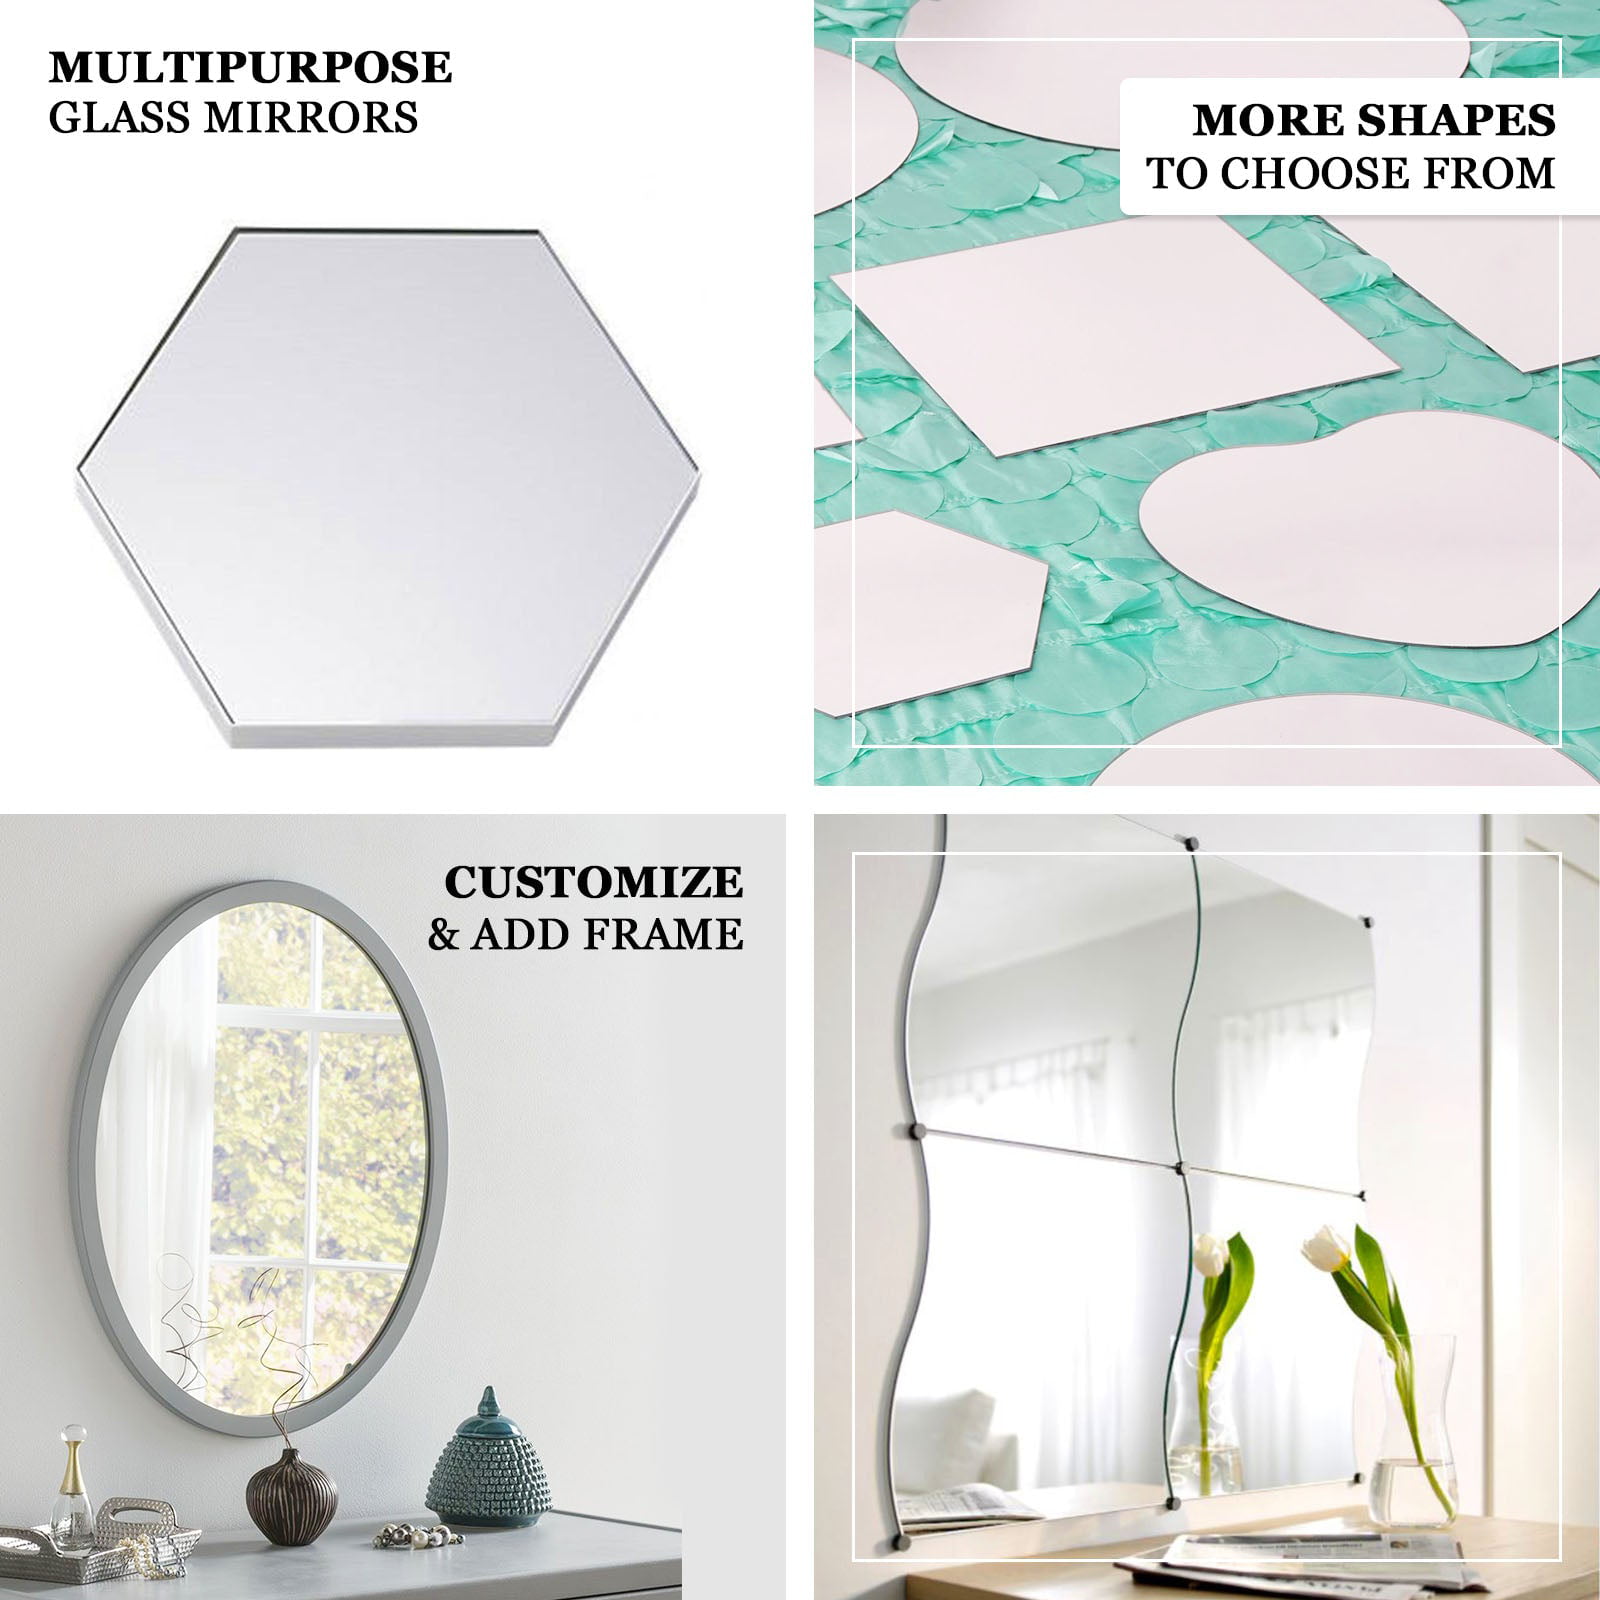 Houseables Mirror Centerpieces, Square Tiles, 10 Pack, 10x10, Glass, for  Wedding Table, Party Décor, Reception, Vanity, Craft, Candle Plate Set